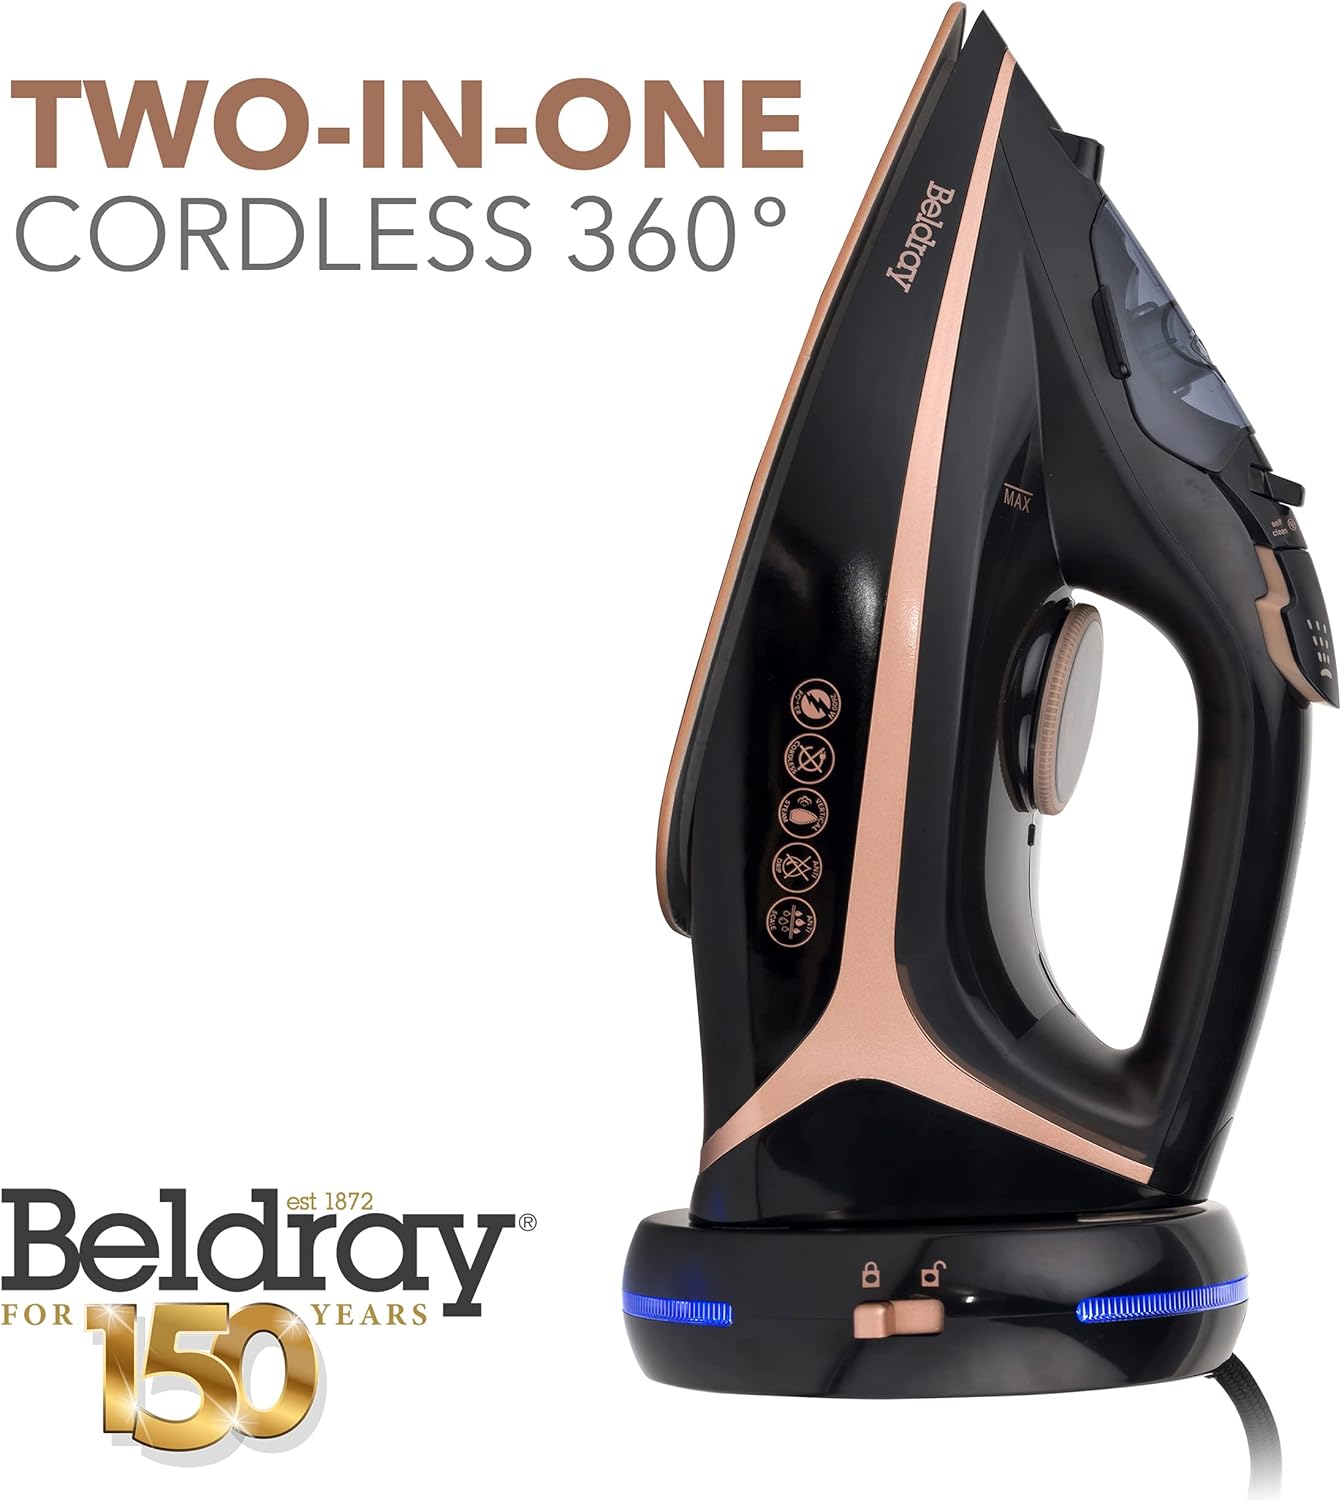 Beldray BEL0987RG 2 in 1 Cordless Steam Iron, 360° Charging Base 0155